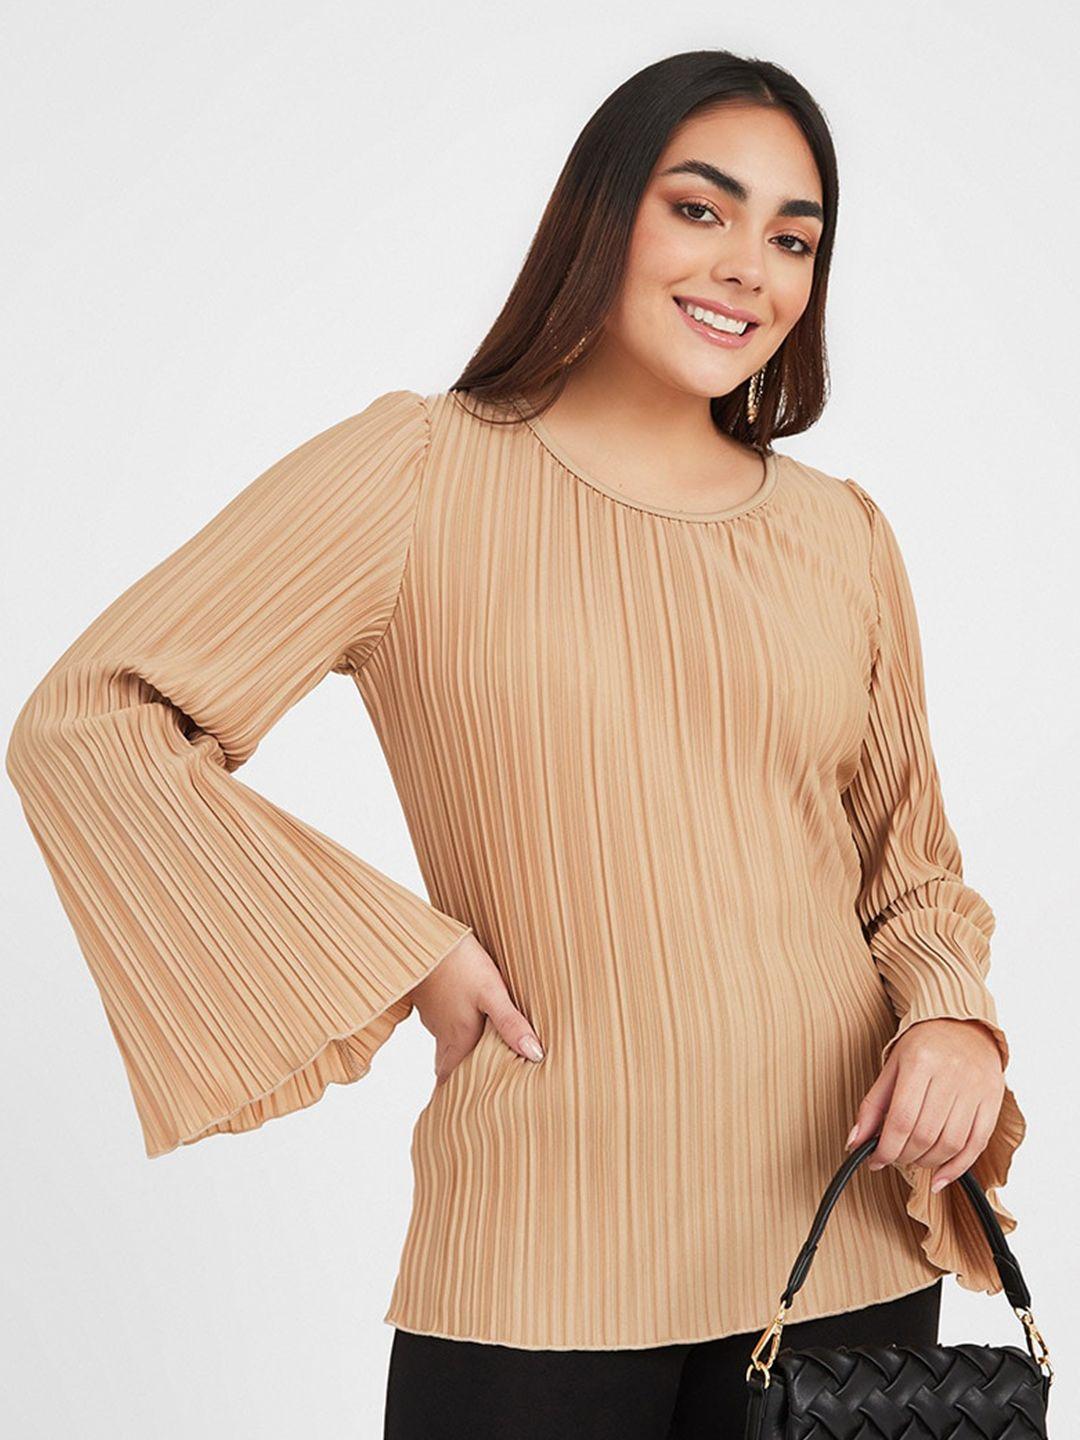 styli-gold-toned-striped-top